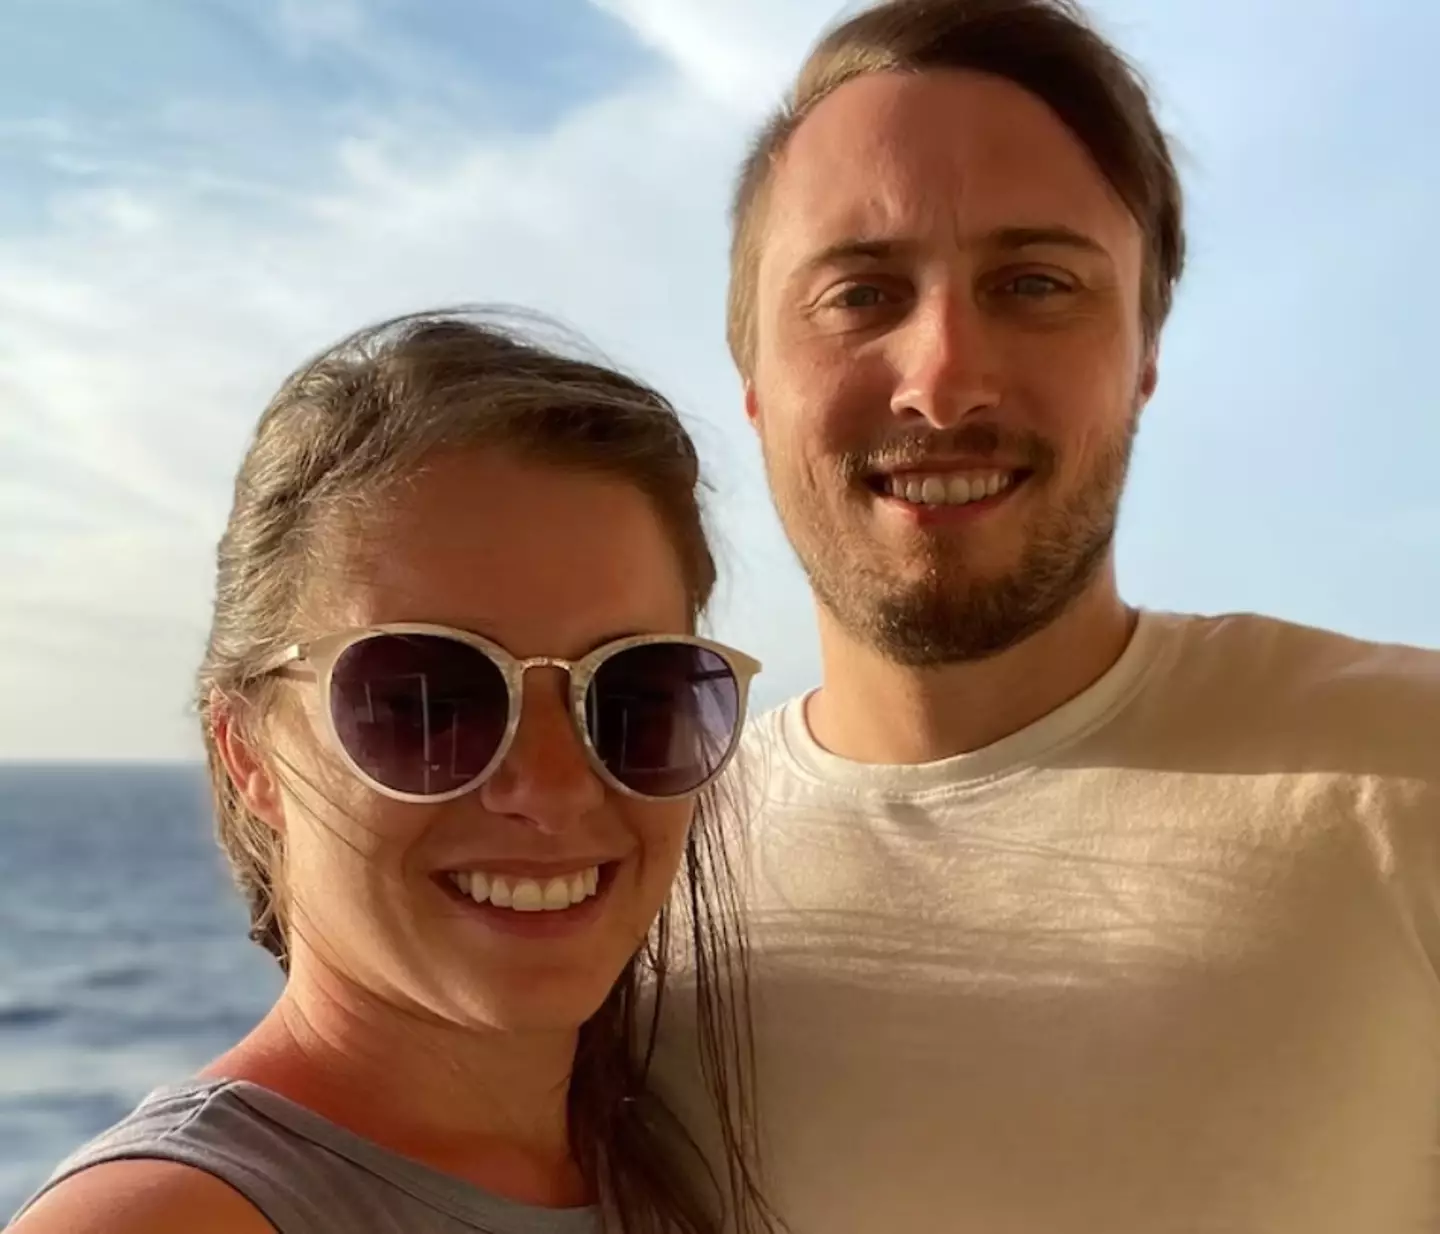 Emily Raines and Daniel Shifflett saved a man's life on board a flight from Florida to Maryland.